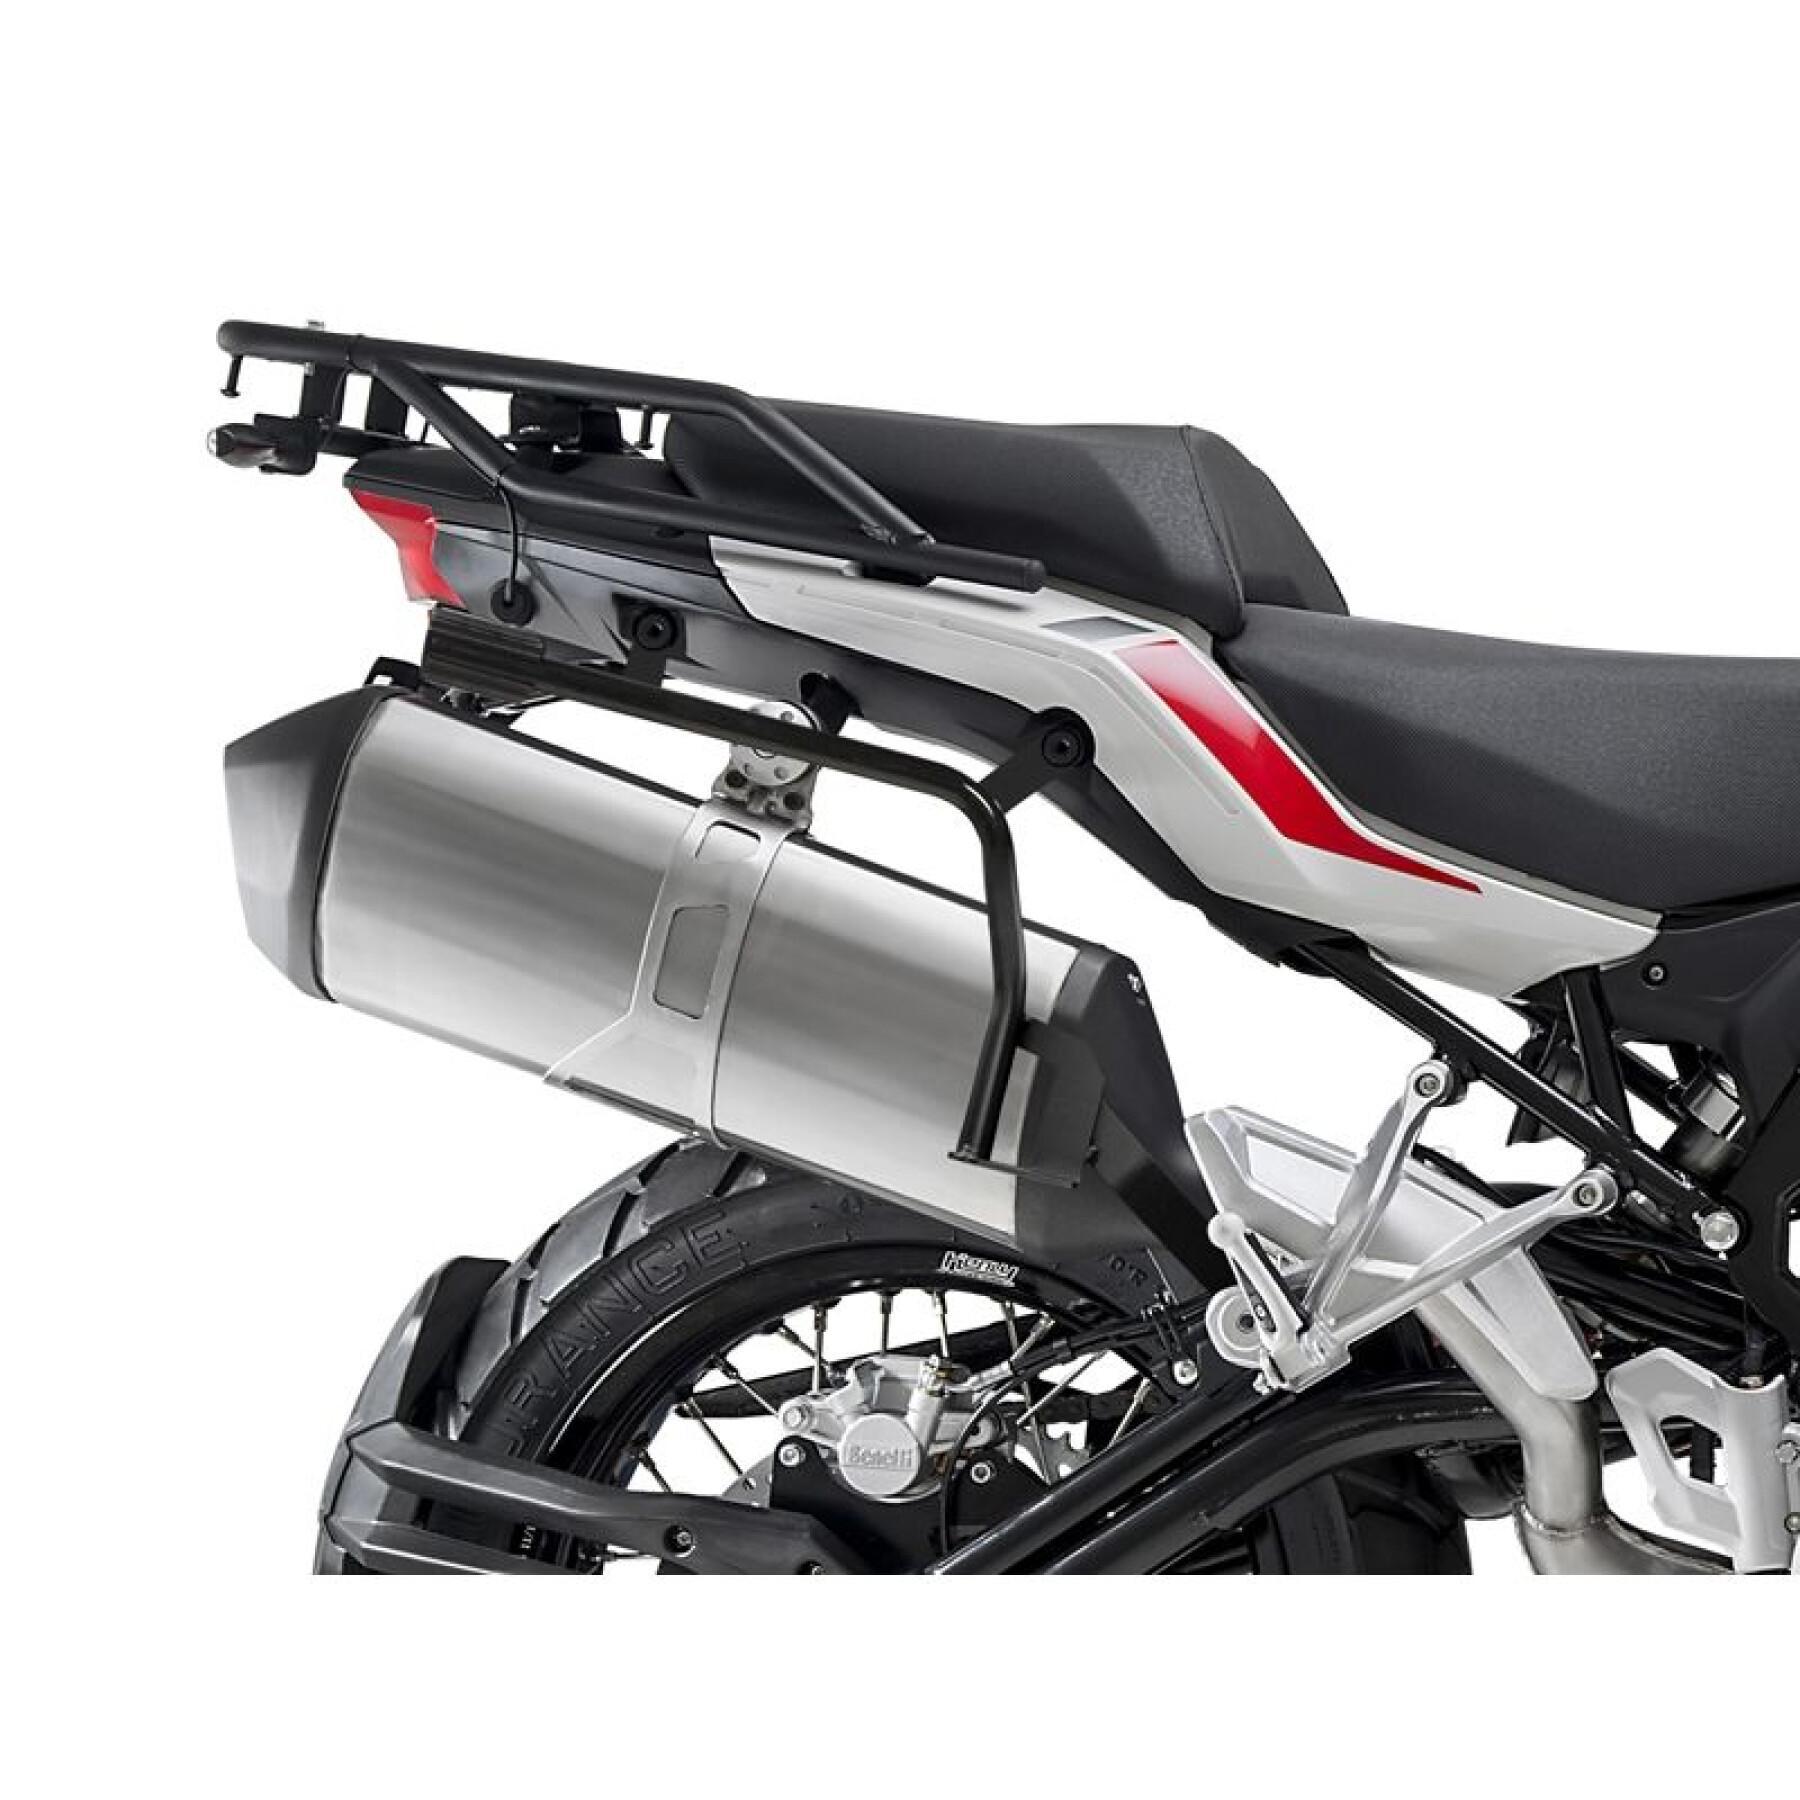 Motorcycle side case support Shad 3P System Benelli Trk 502X (18 TO 21)